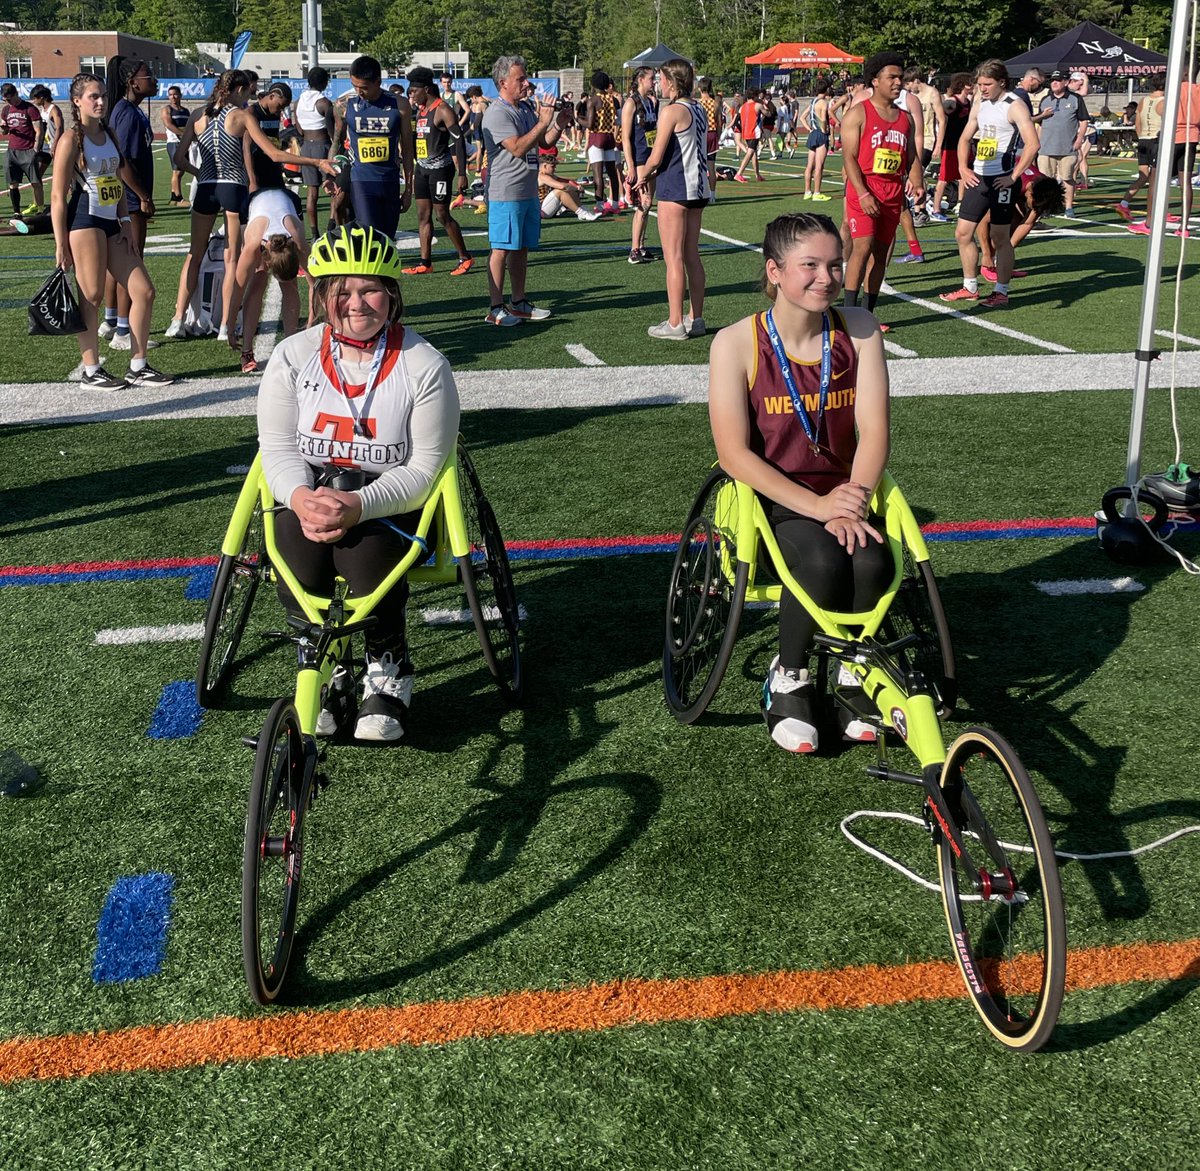 3 more medalists from Day 2 of Division 1 Championship! Mary MacDonald placed 2nd in the 100m PARA. Malachi Johnson placed 6th in LJ. Dmitrius Shearrion placed 5th in the 100m dash. Overall great weekend for all athletes competing!